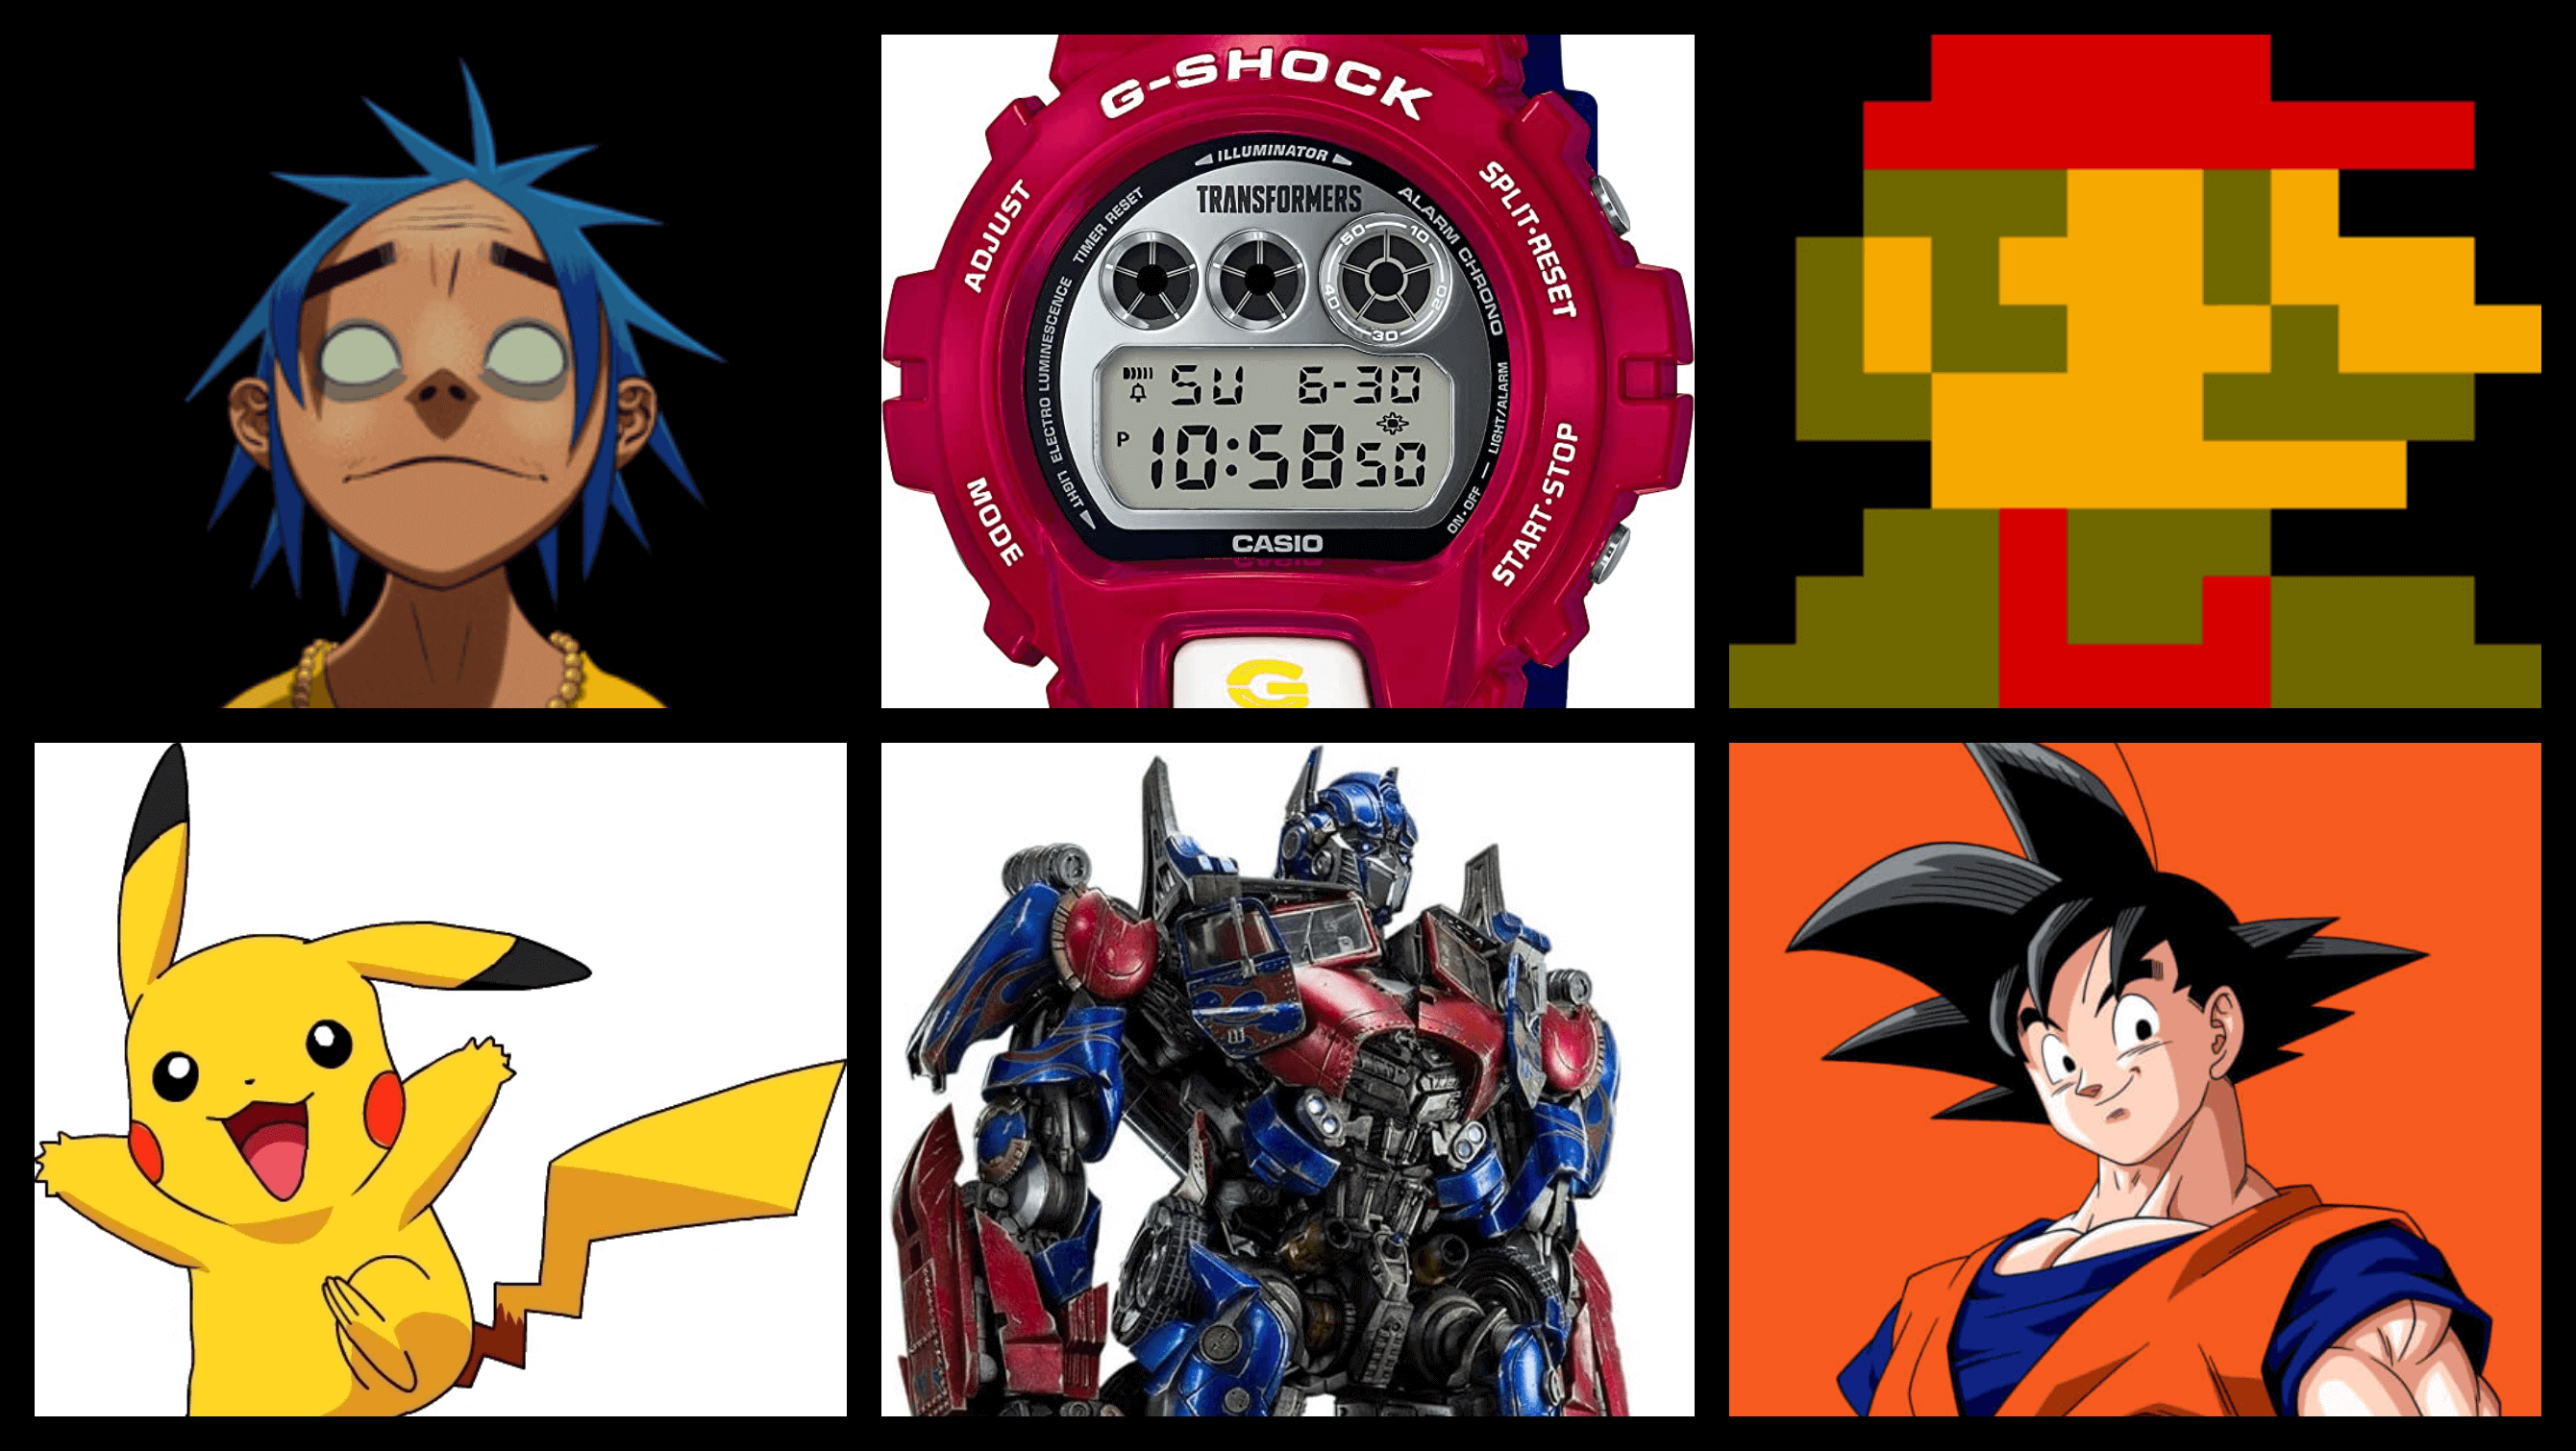 Tooning Up: 5 of the best limited-edition character G-Shocks